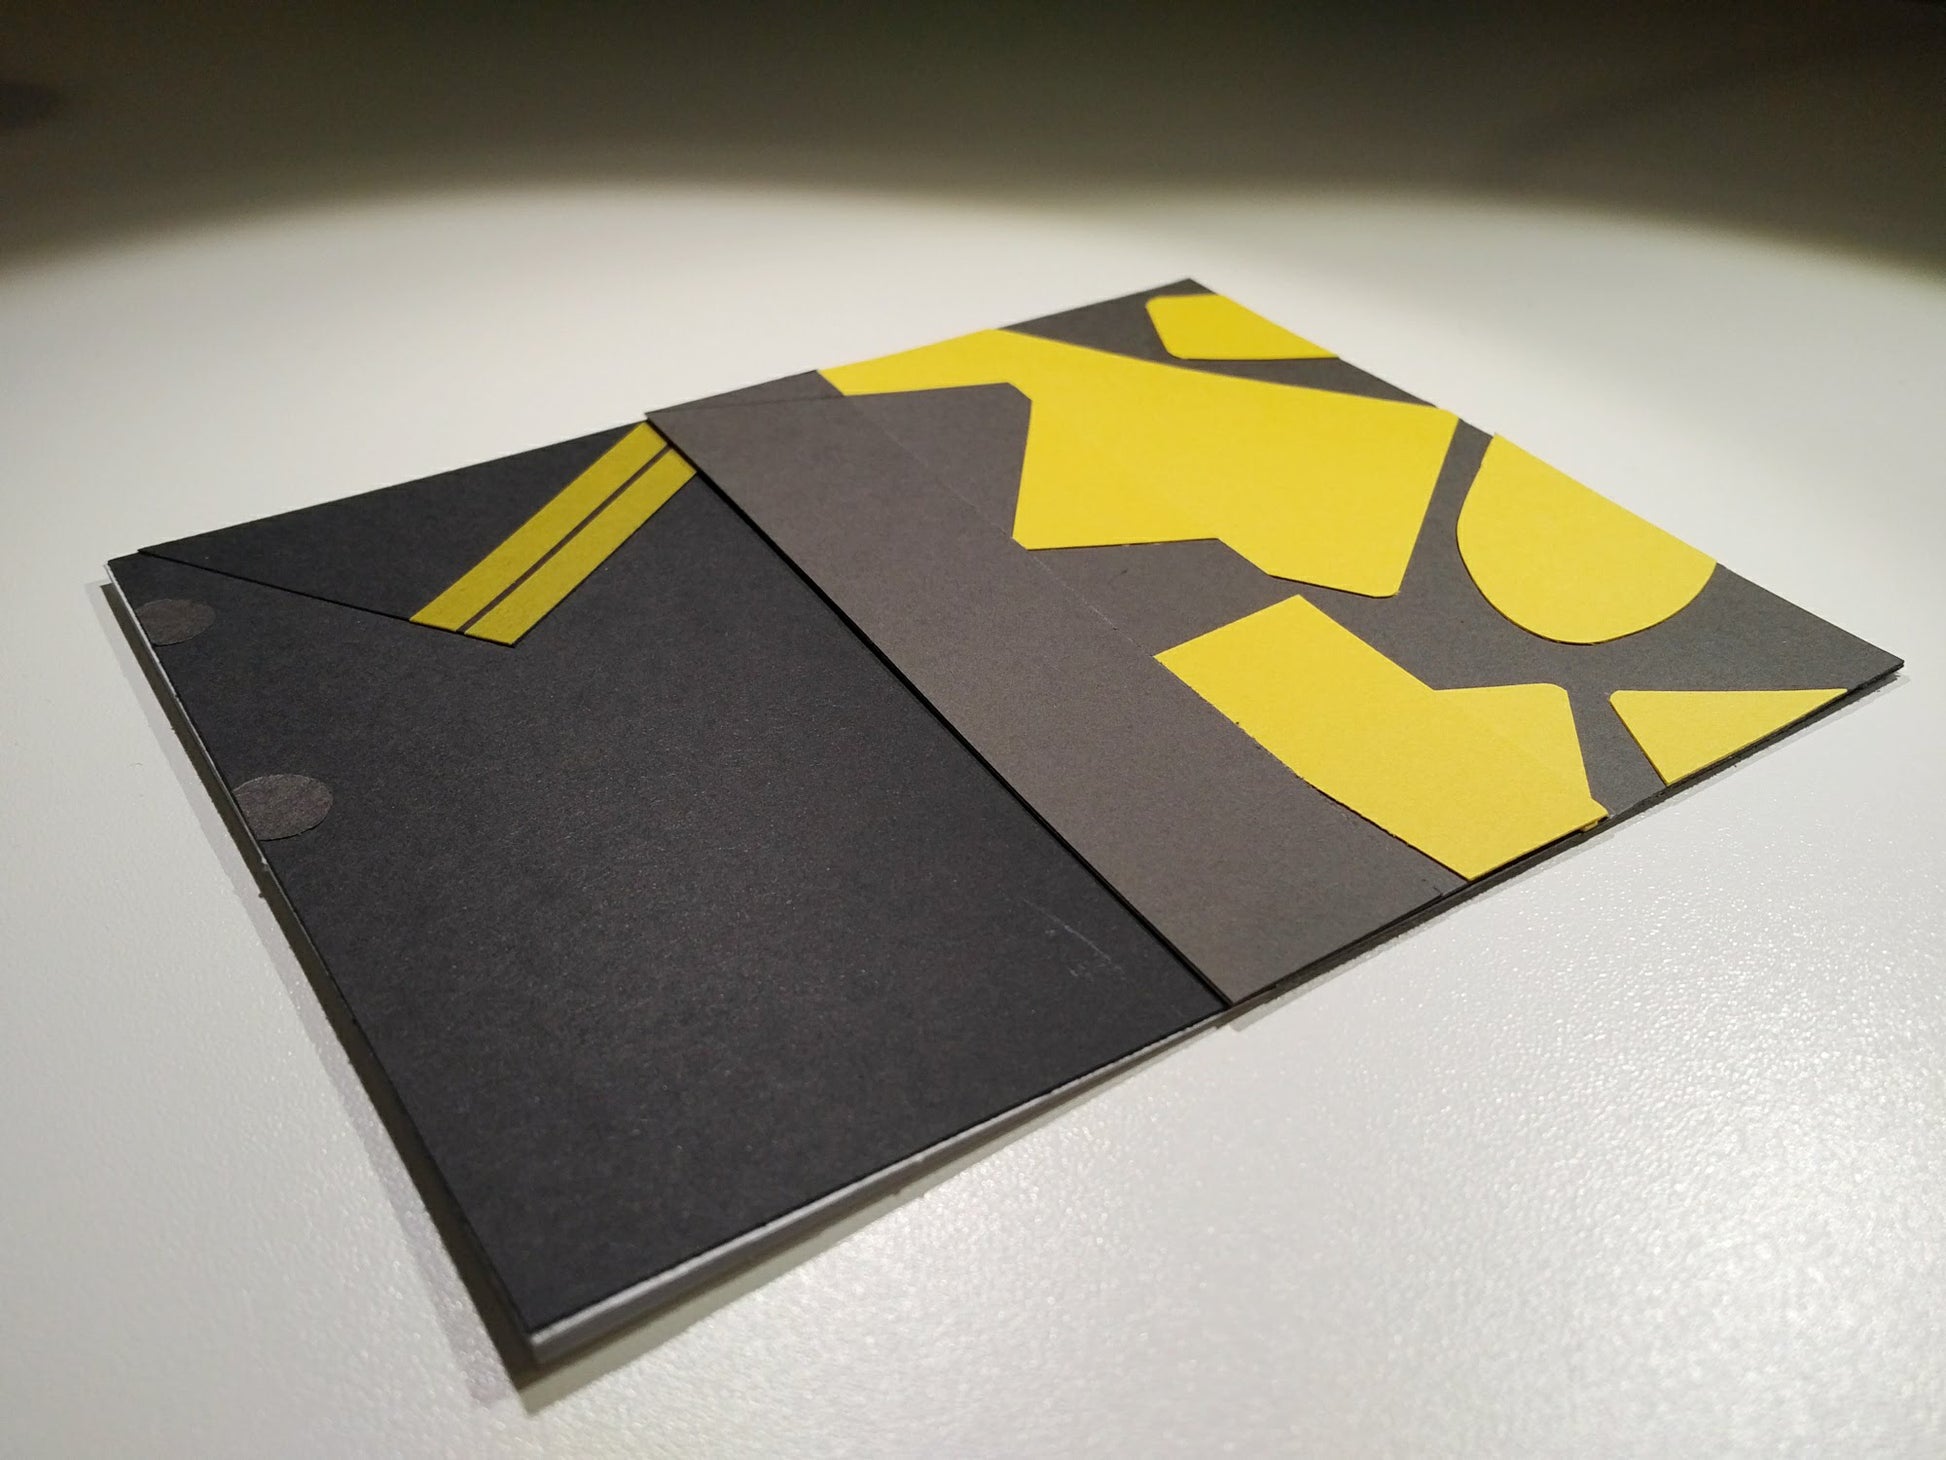 A card lays at an angle on a white desk. The front of the card looks like a portion of person's shirt, black with yellow details, designed to look like an outfit worn by Eggsy Unwin in the movie Kingsman: The Secret Service.